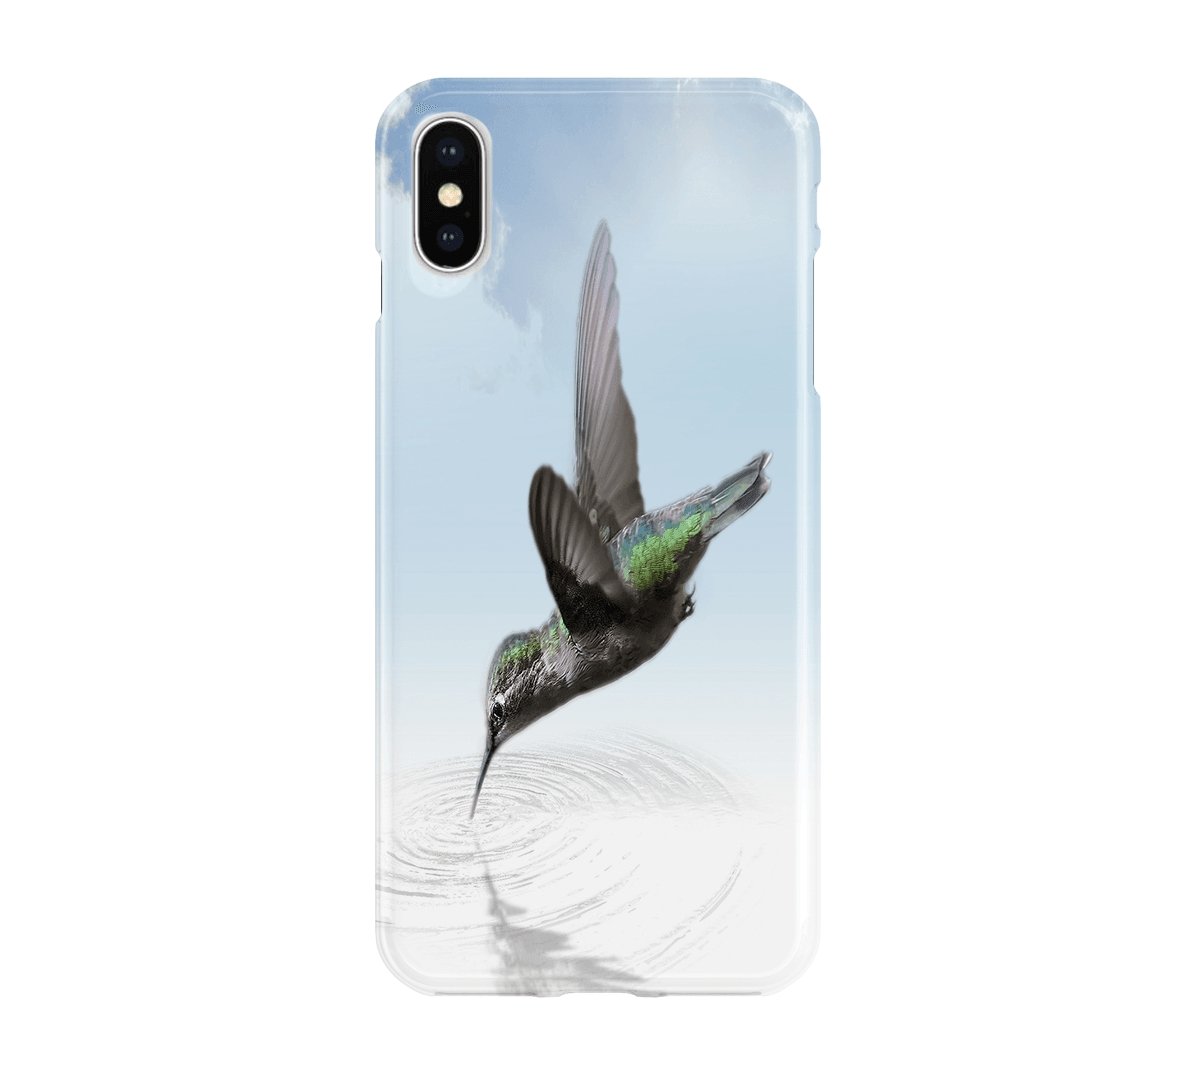 Simple Hummingbird - iPhone phone case designs by CaseSwagger